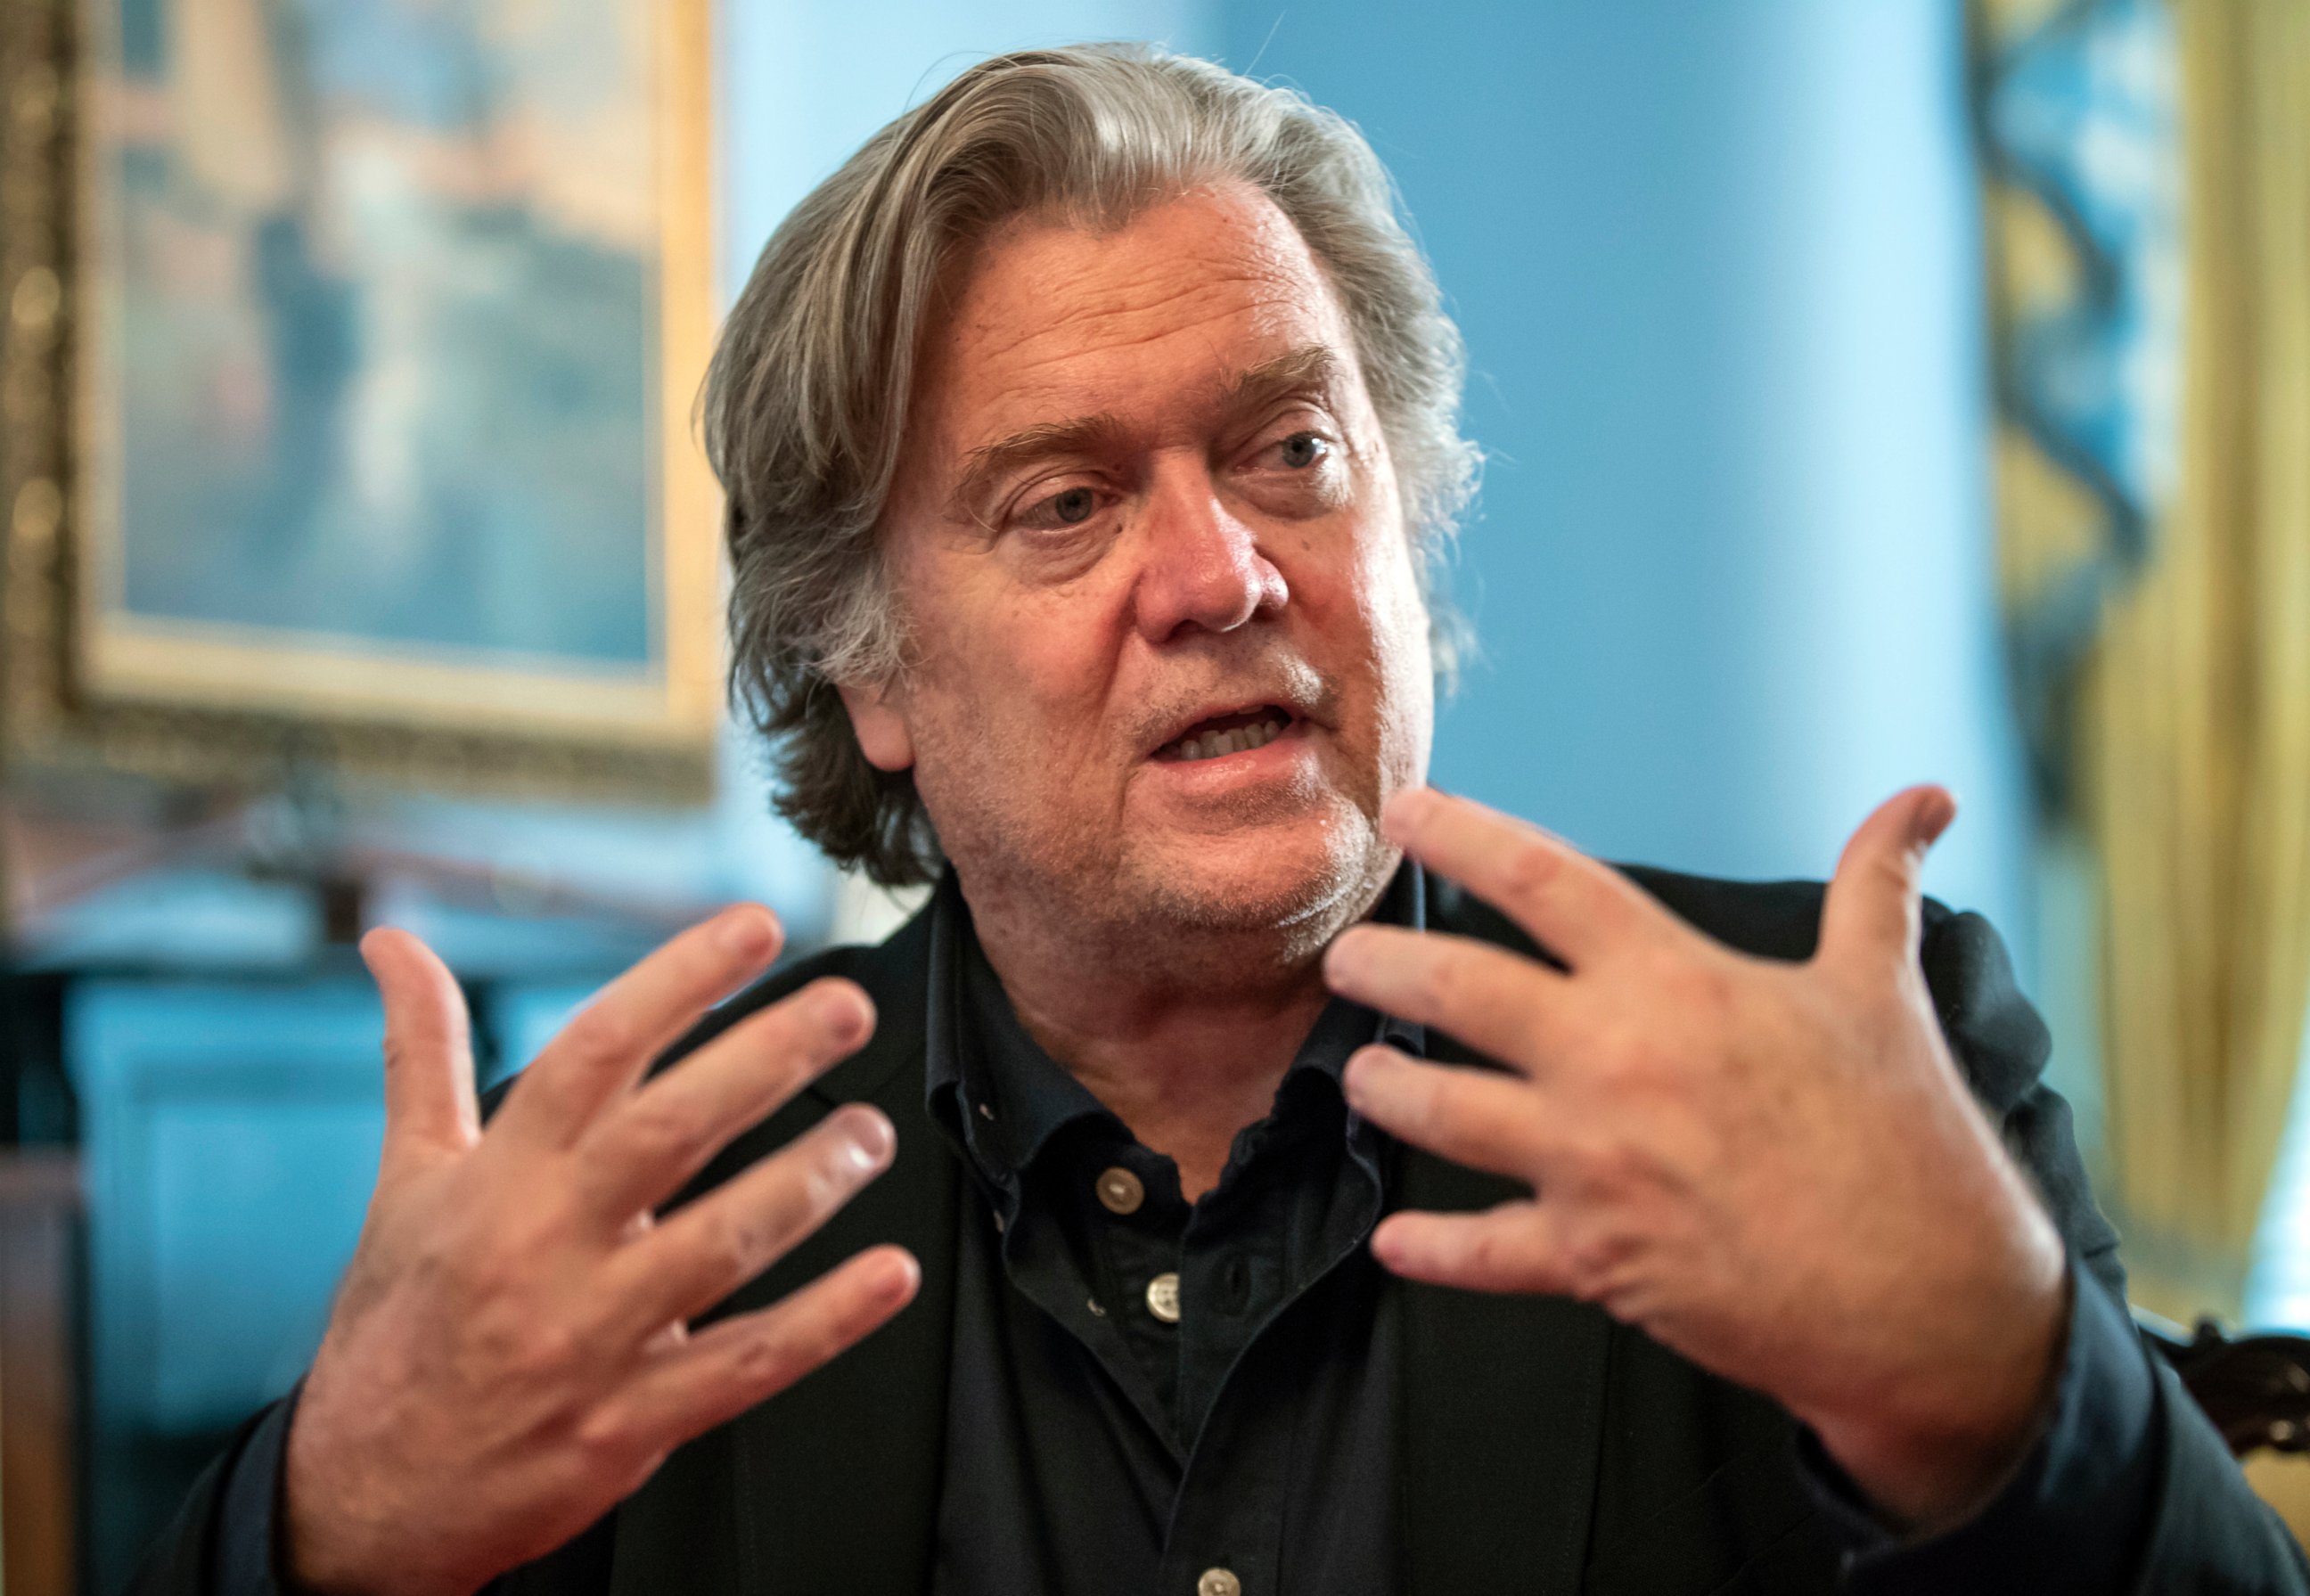 In this Aug. 19, 2018 file photo, Steve Bannon, President Donald Trump's former chief strategist, talks about the approaching midterm election during an interview in Washington.